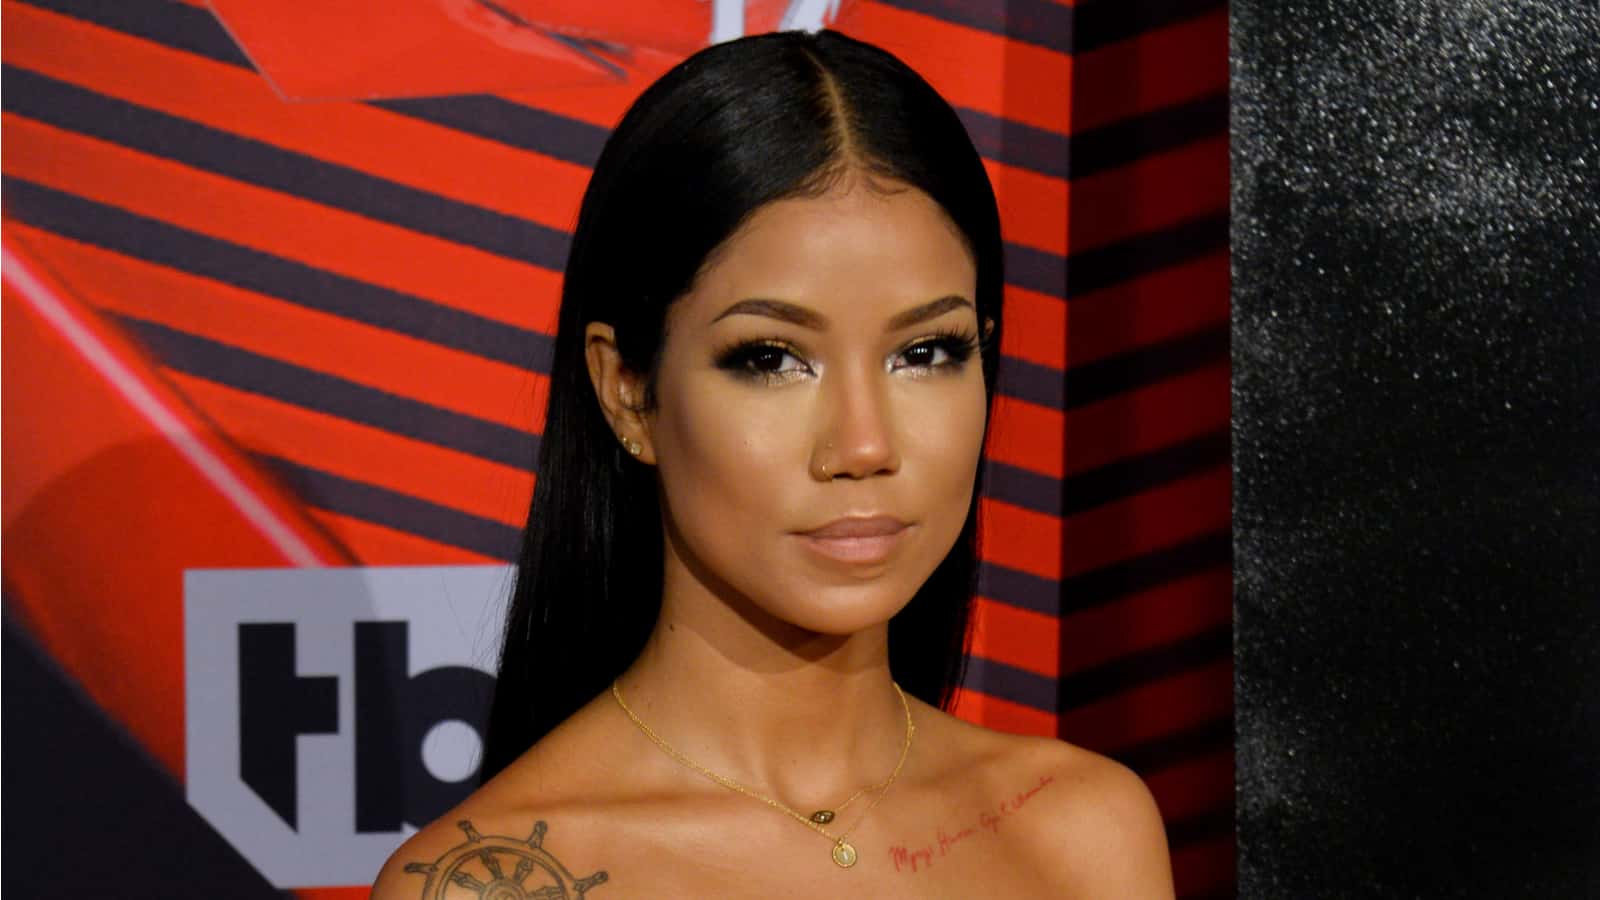 Jhene Aiko Talks New Music & Being 'Skinny, but Still Insecure